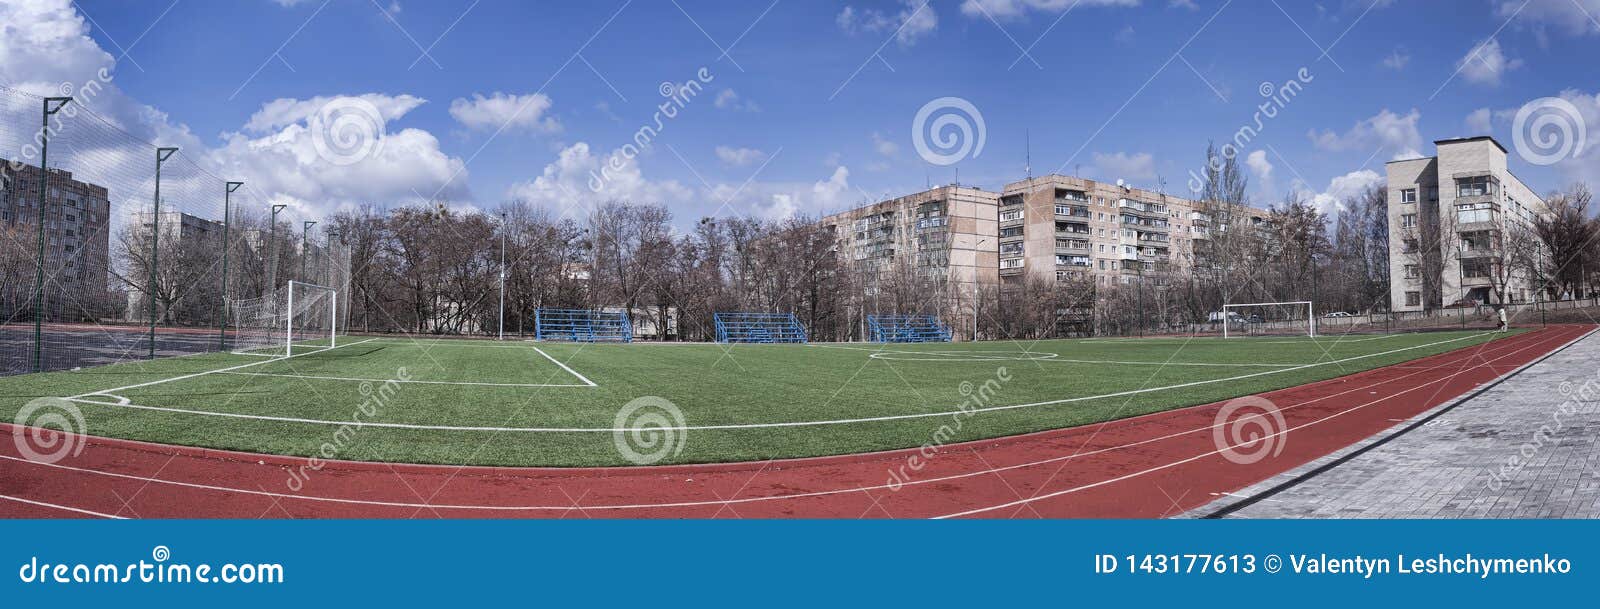 a stadium on the school`s territory in a residential area of Ã¢â¬â¹Ã¢â¬â¹kramatorsk, ukraine